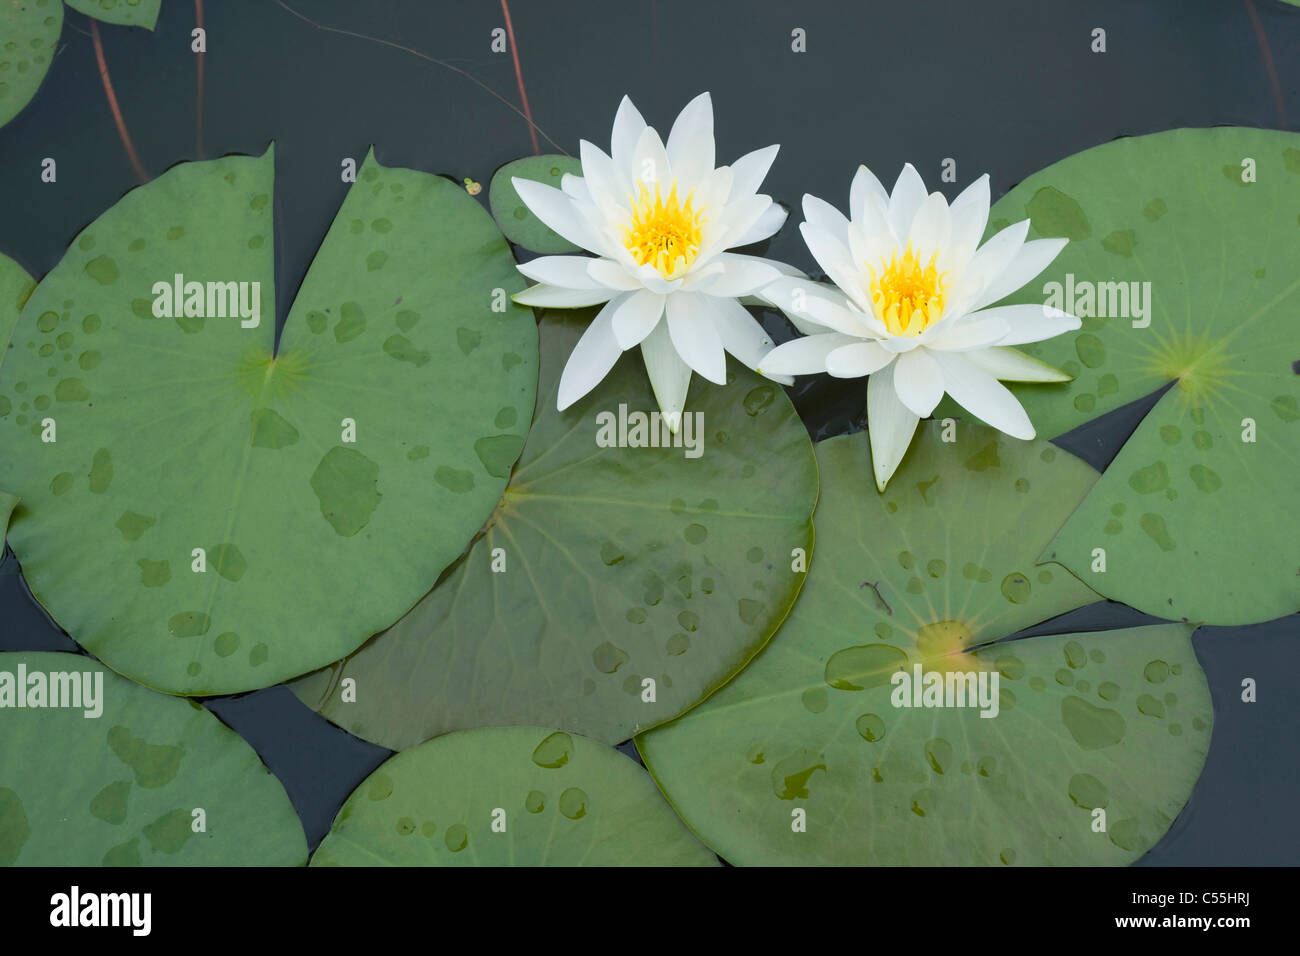 lotus flowers and leaves Stock Photo